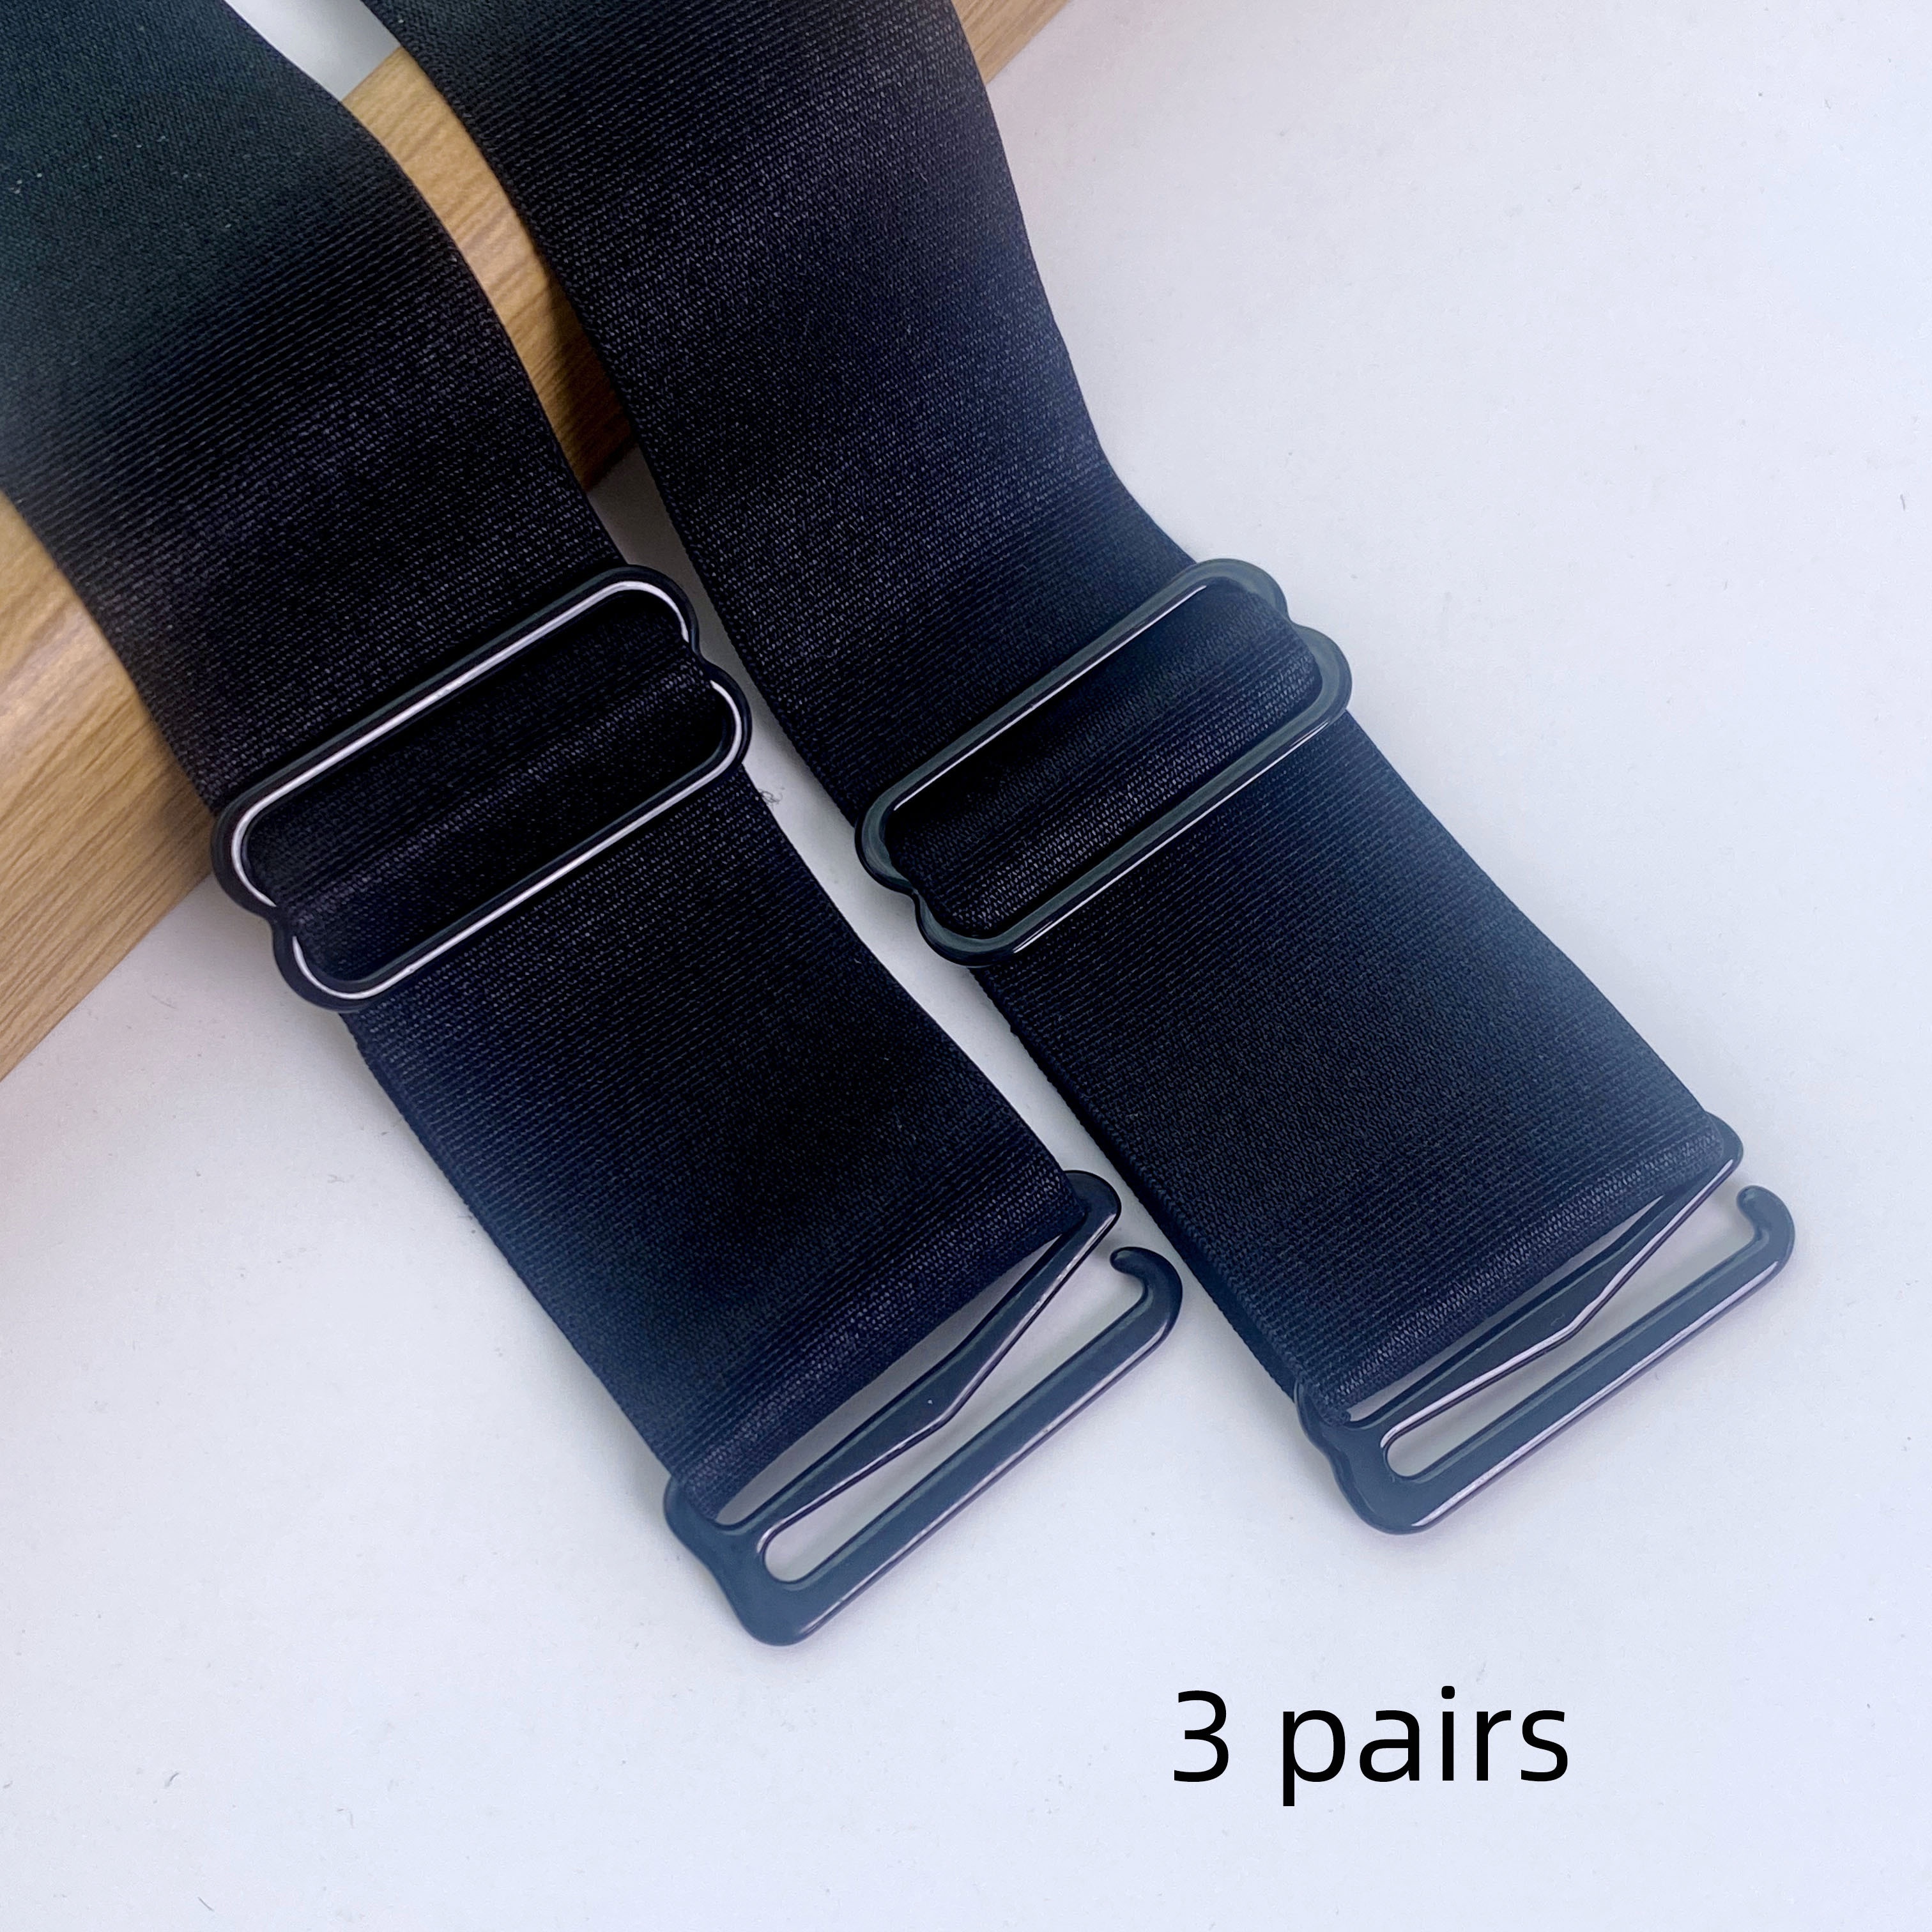 2 Pairs Black Removable Adjustable Bra Straps - Comfortable and Stylish